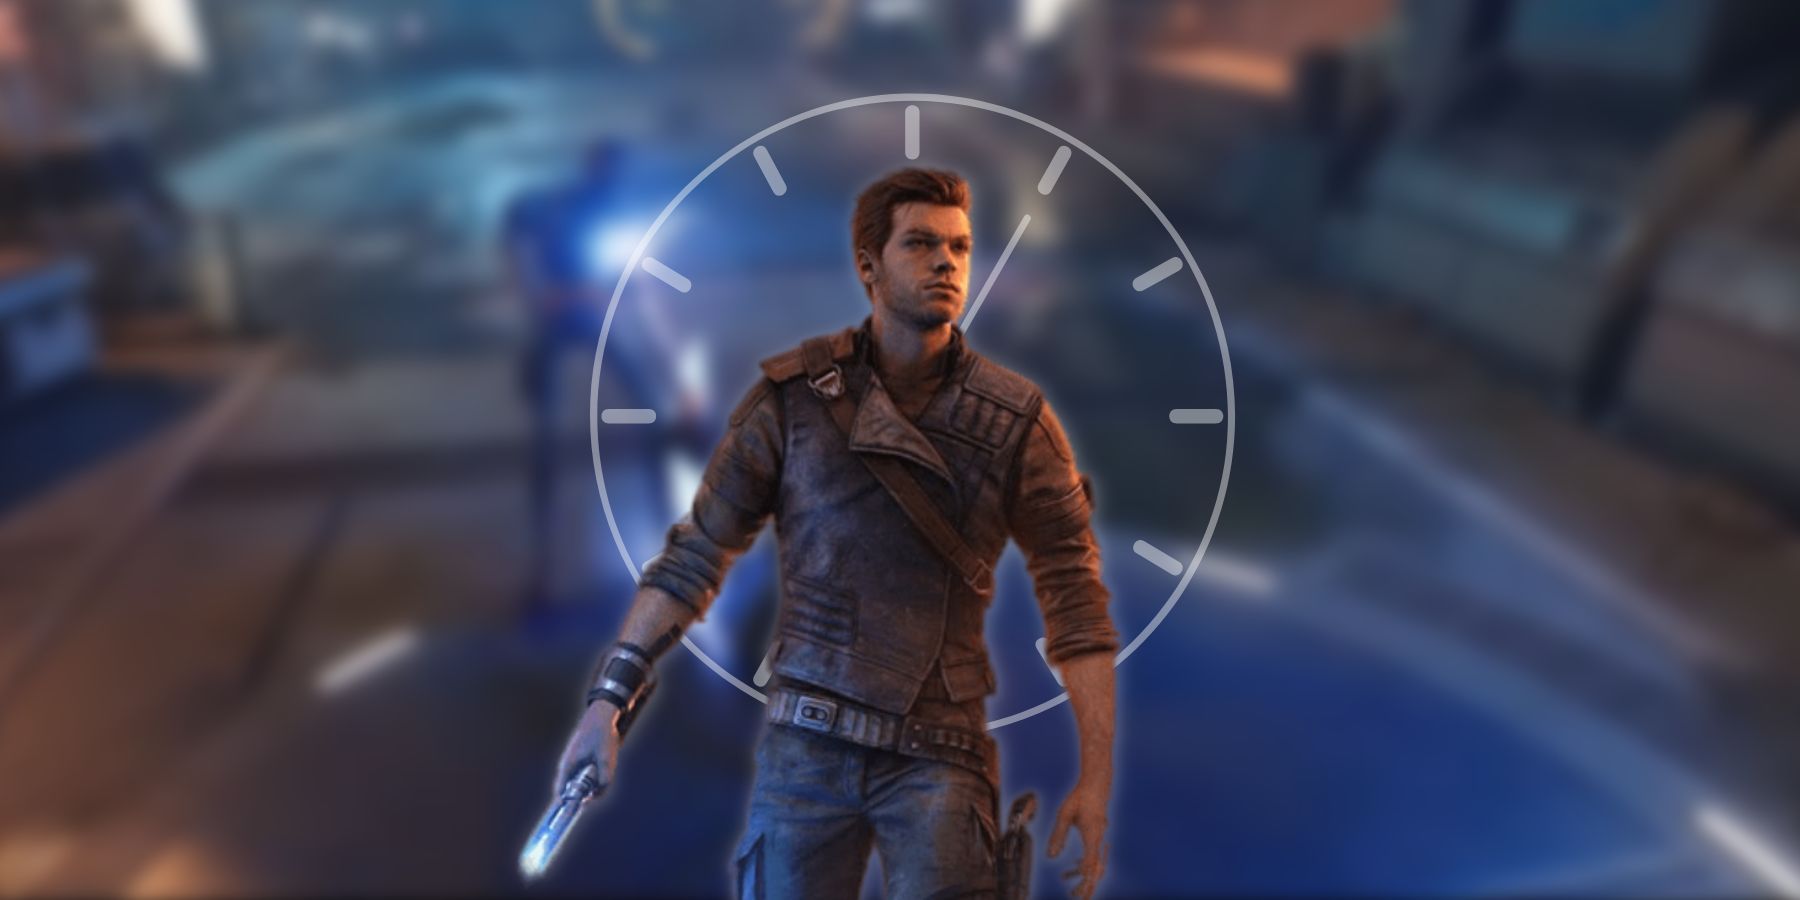 How Long Does It Take To Finish Star Wars Jedi: Fallen Order?